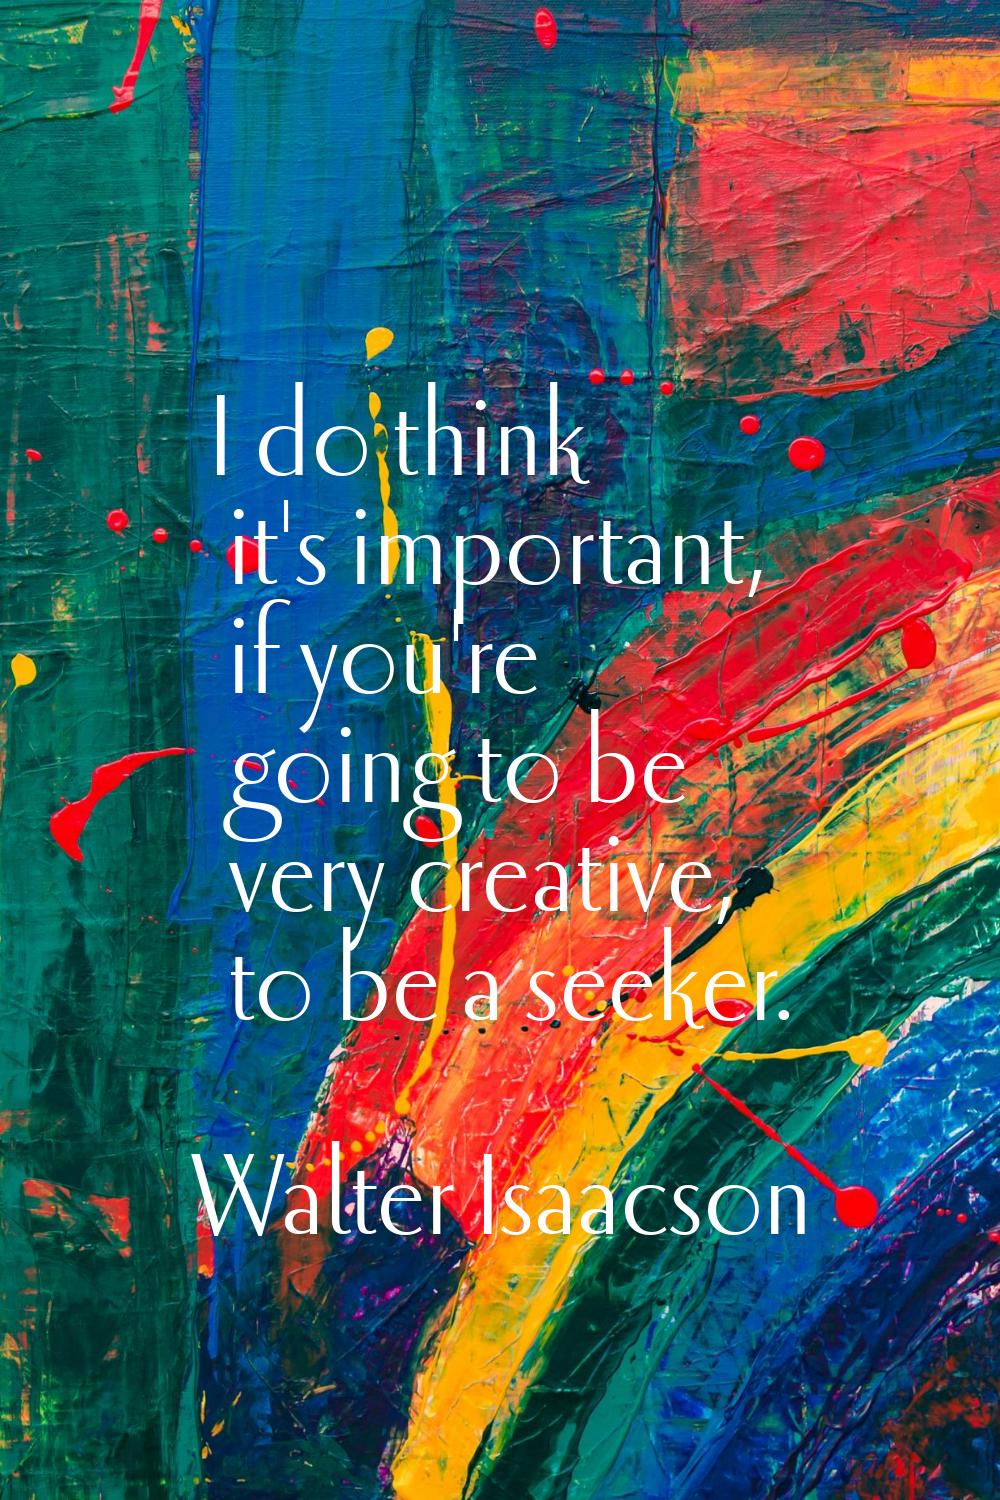 I do think it's important, if you're going to be very creative, to be a seeker.